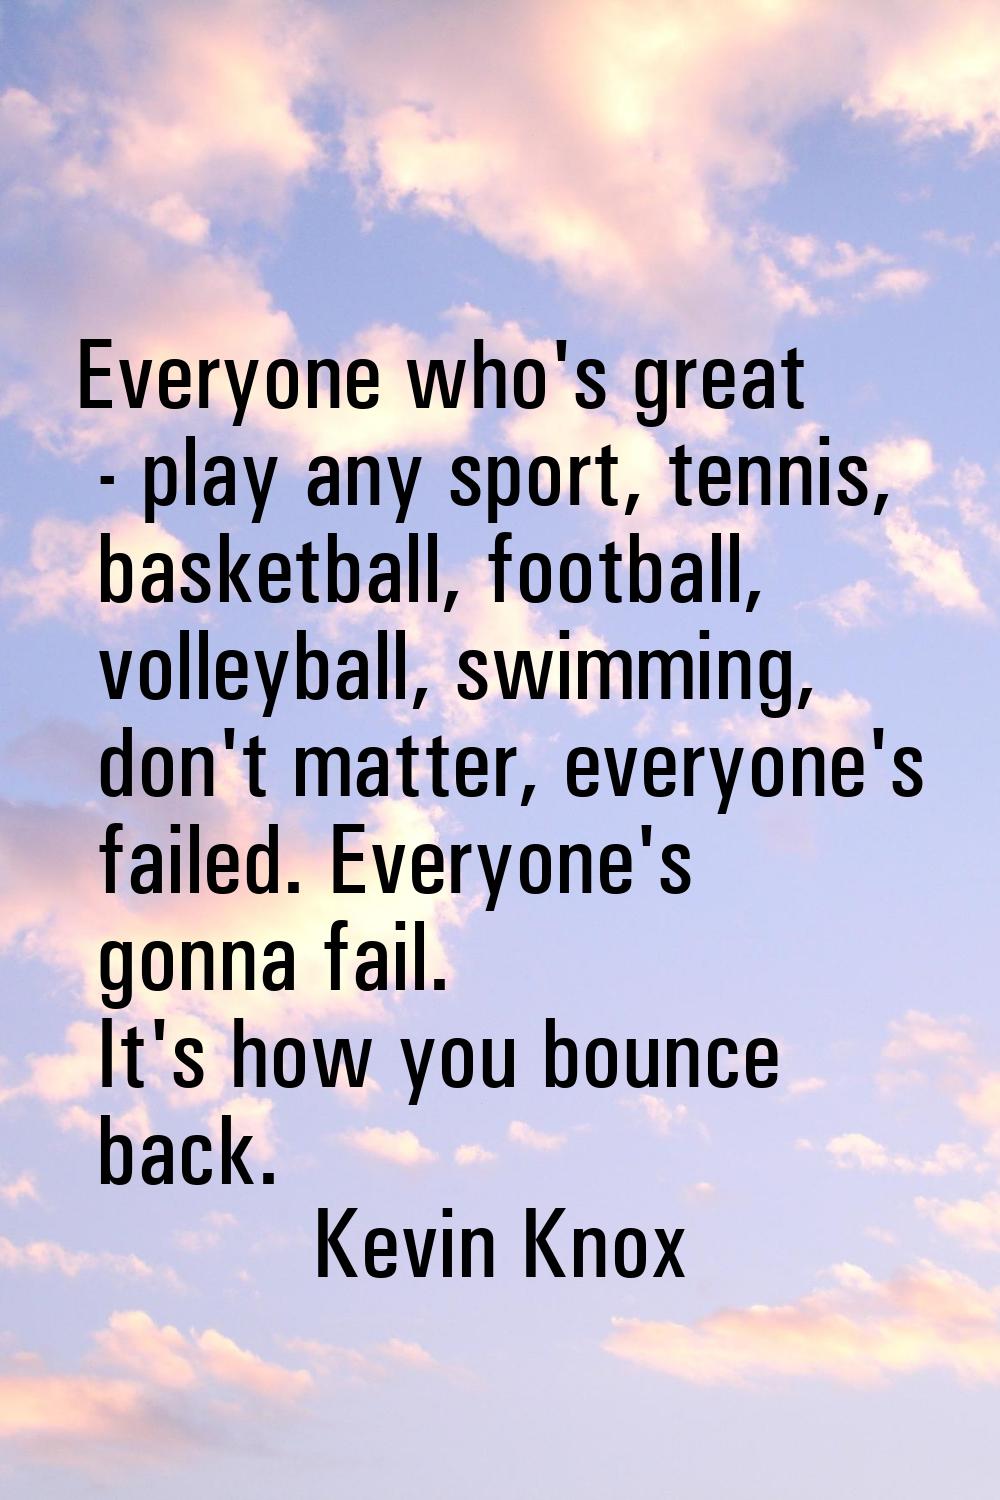 Everyone who's great - play any sport, tennis, basketball, football, volleyball, swimming, don't ma